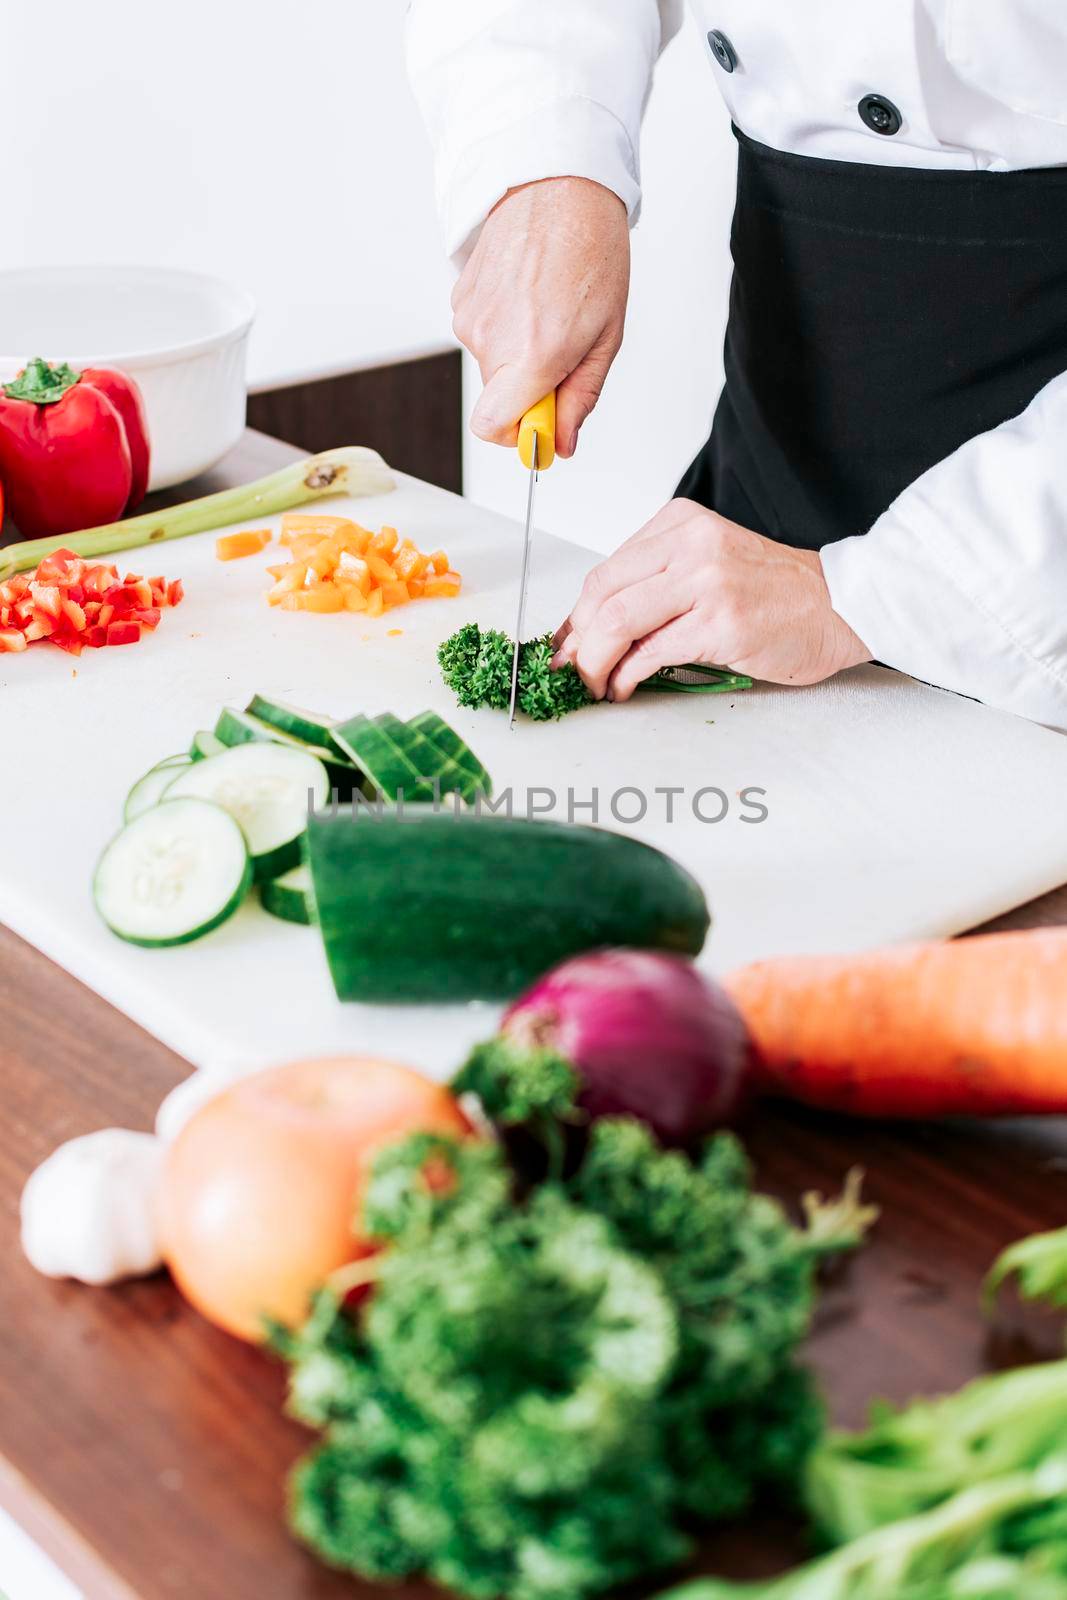 Hands of female chef cutting vegetables, chef hands preparing and cutting vegetables, Close up of a female chef cutting vegetables by isaiphoto